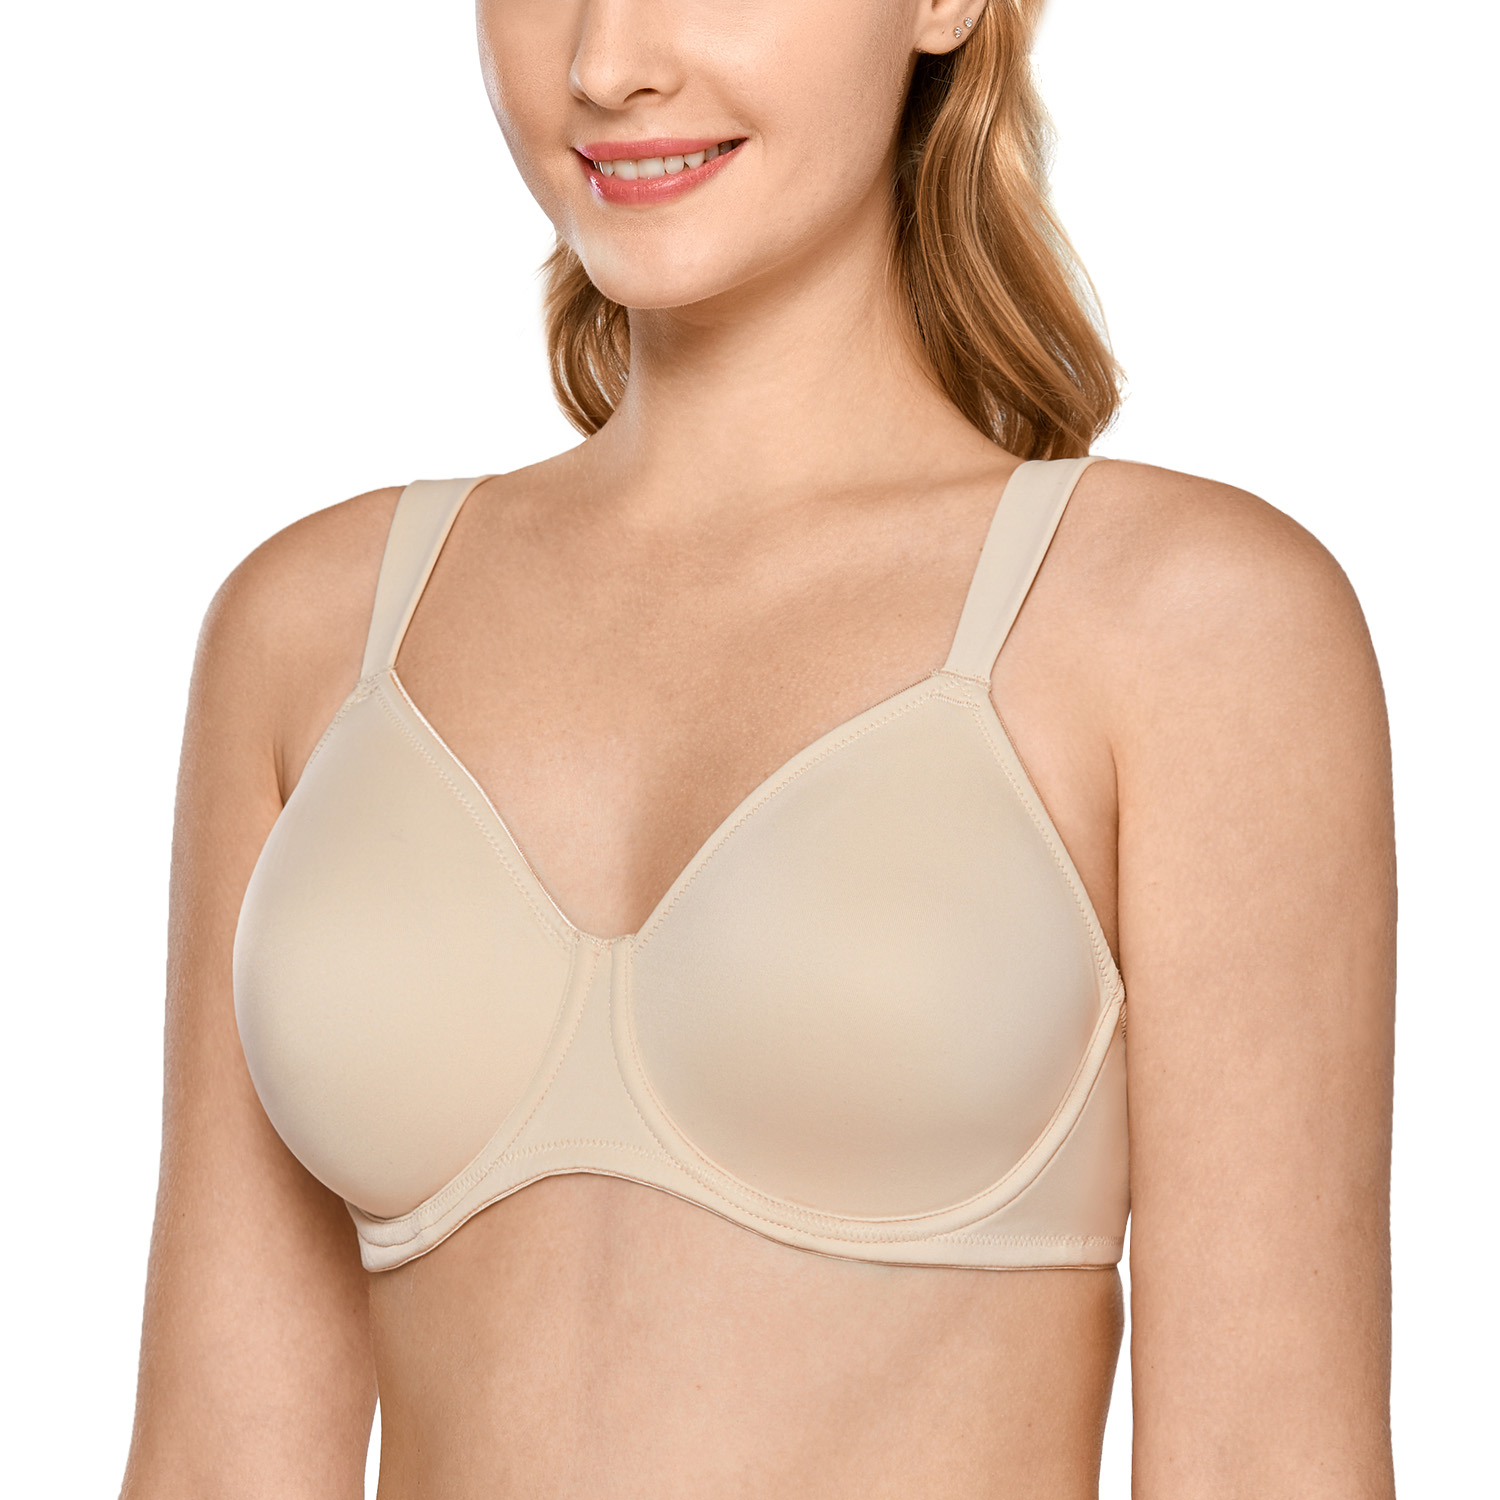 AISILIN Women's Strapless Bra for Big Bust Minimizer Unlined